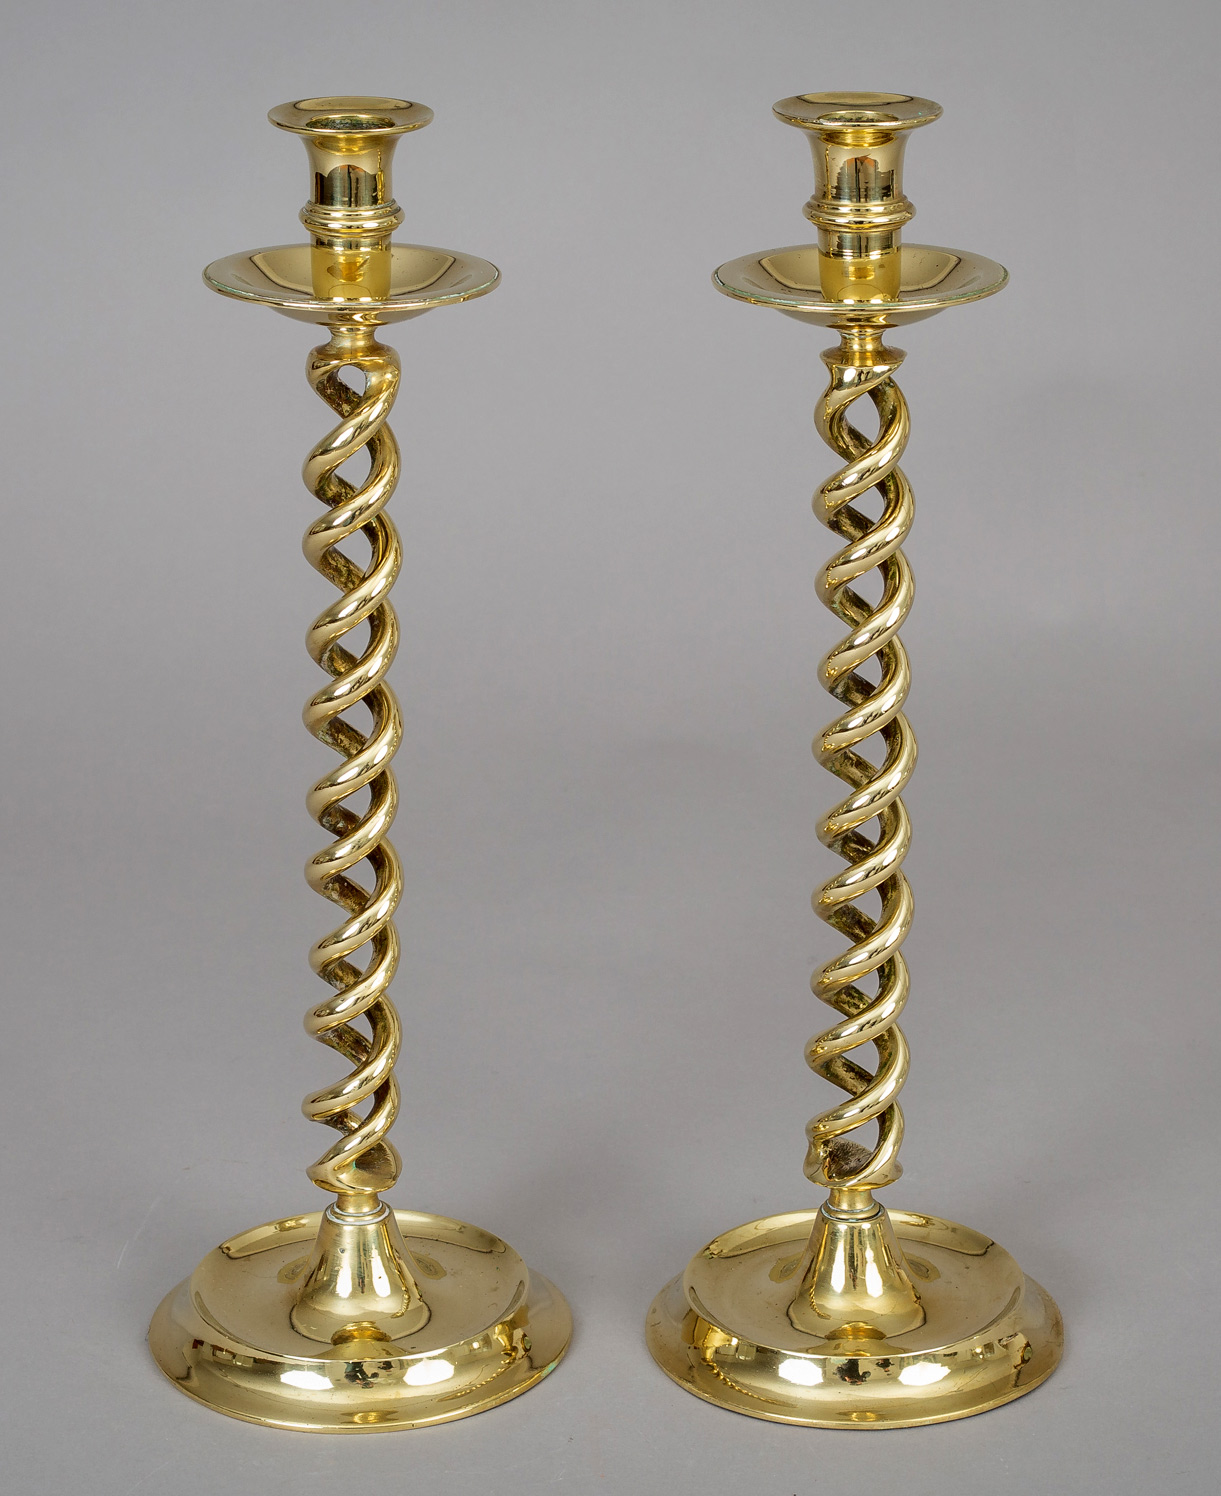 Lot - PAIR OF ENGLISH BRASS 'BEEHIVE' CANDLESTICKS AND A BRASS OIL LAMP  Height of candlesticks: 11 3/4 in. (29.8 cm.), Height of lamp: 11 1/2 in.  (29.2 cm.)